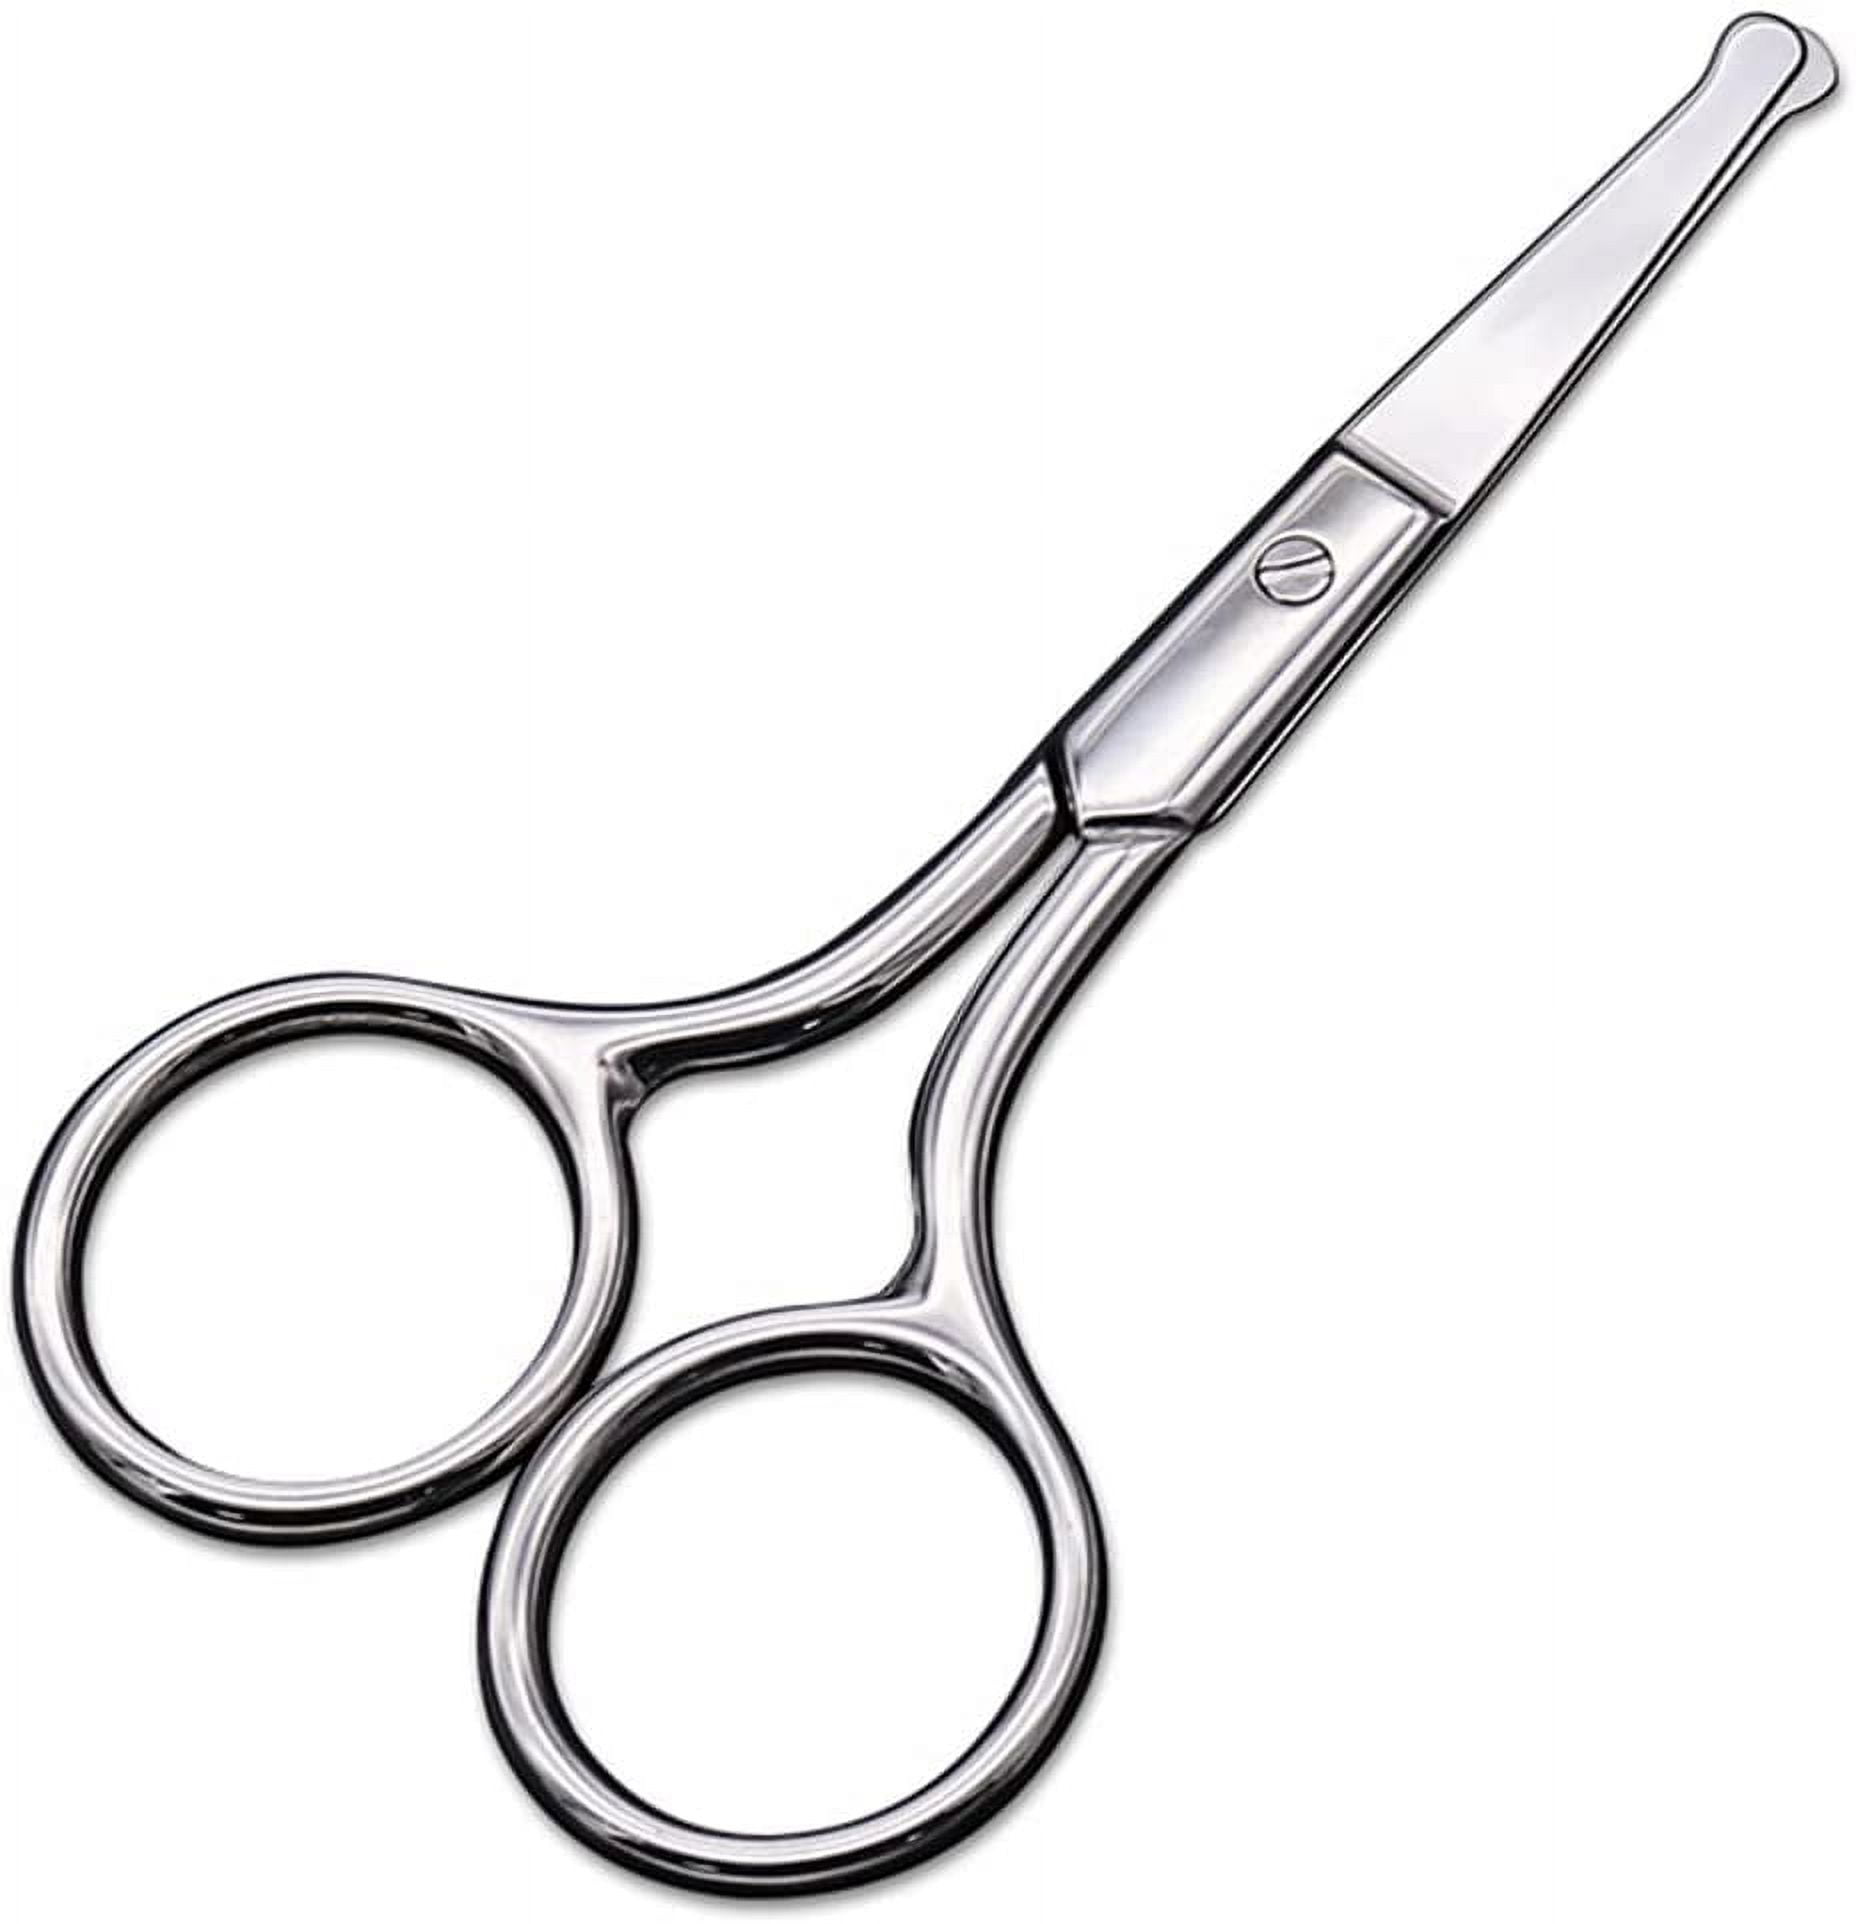 Effenfine Hair Scissors for Trimming - Safely Trim Nose Ears Eyebrows  Mustaches and Beards, German Stainless Steel Scissors with Safety Tips